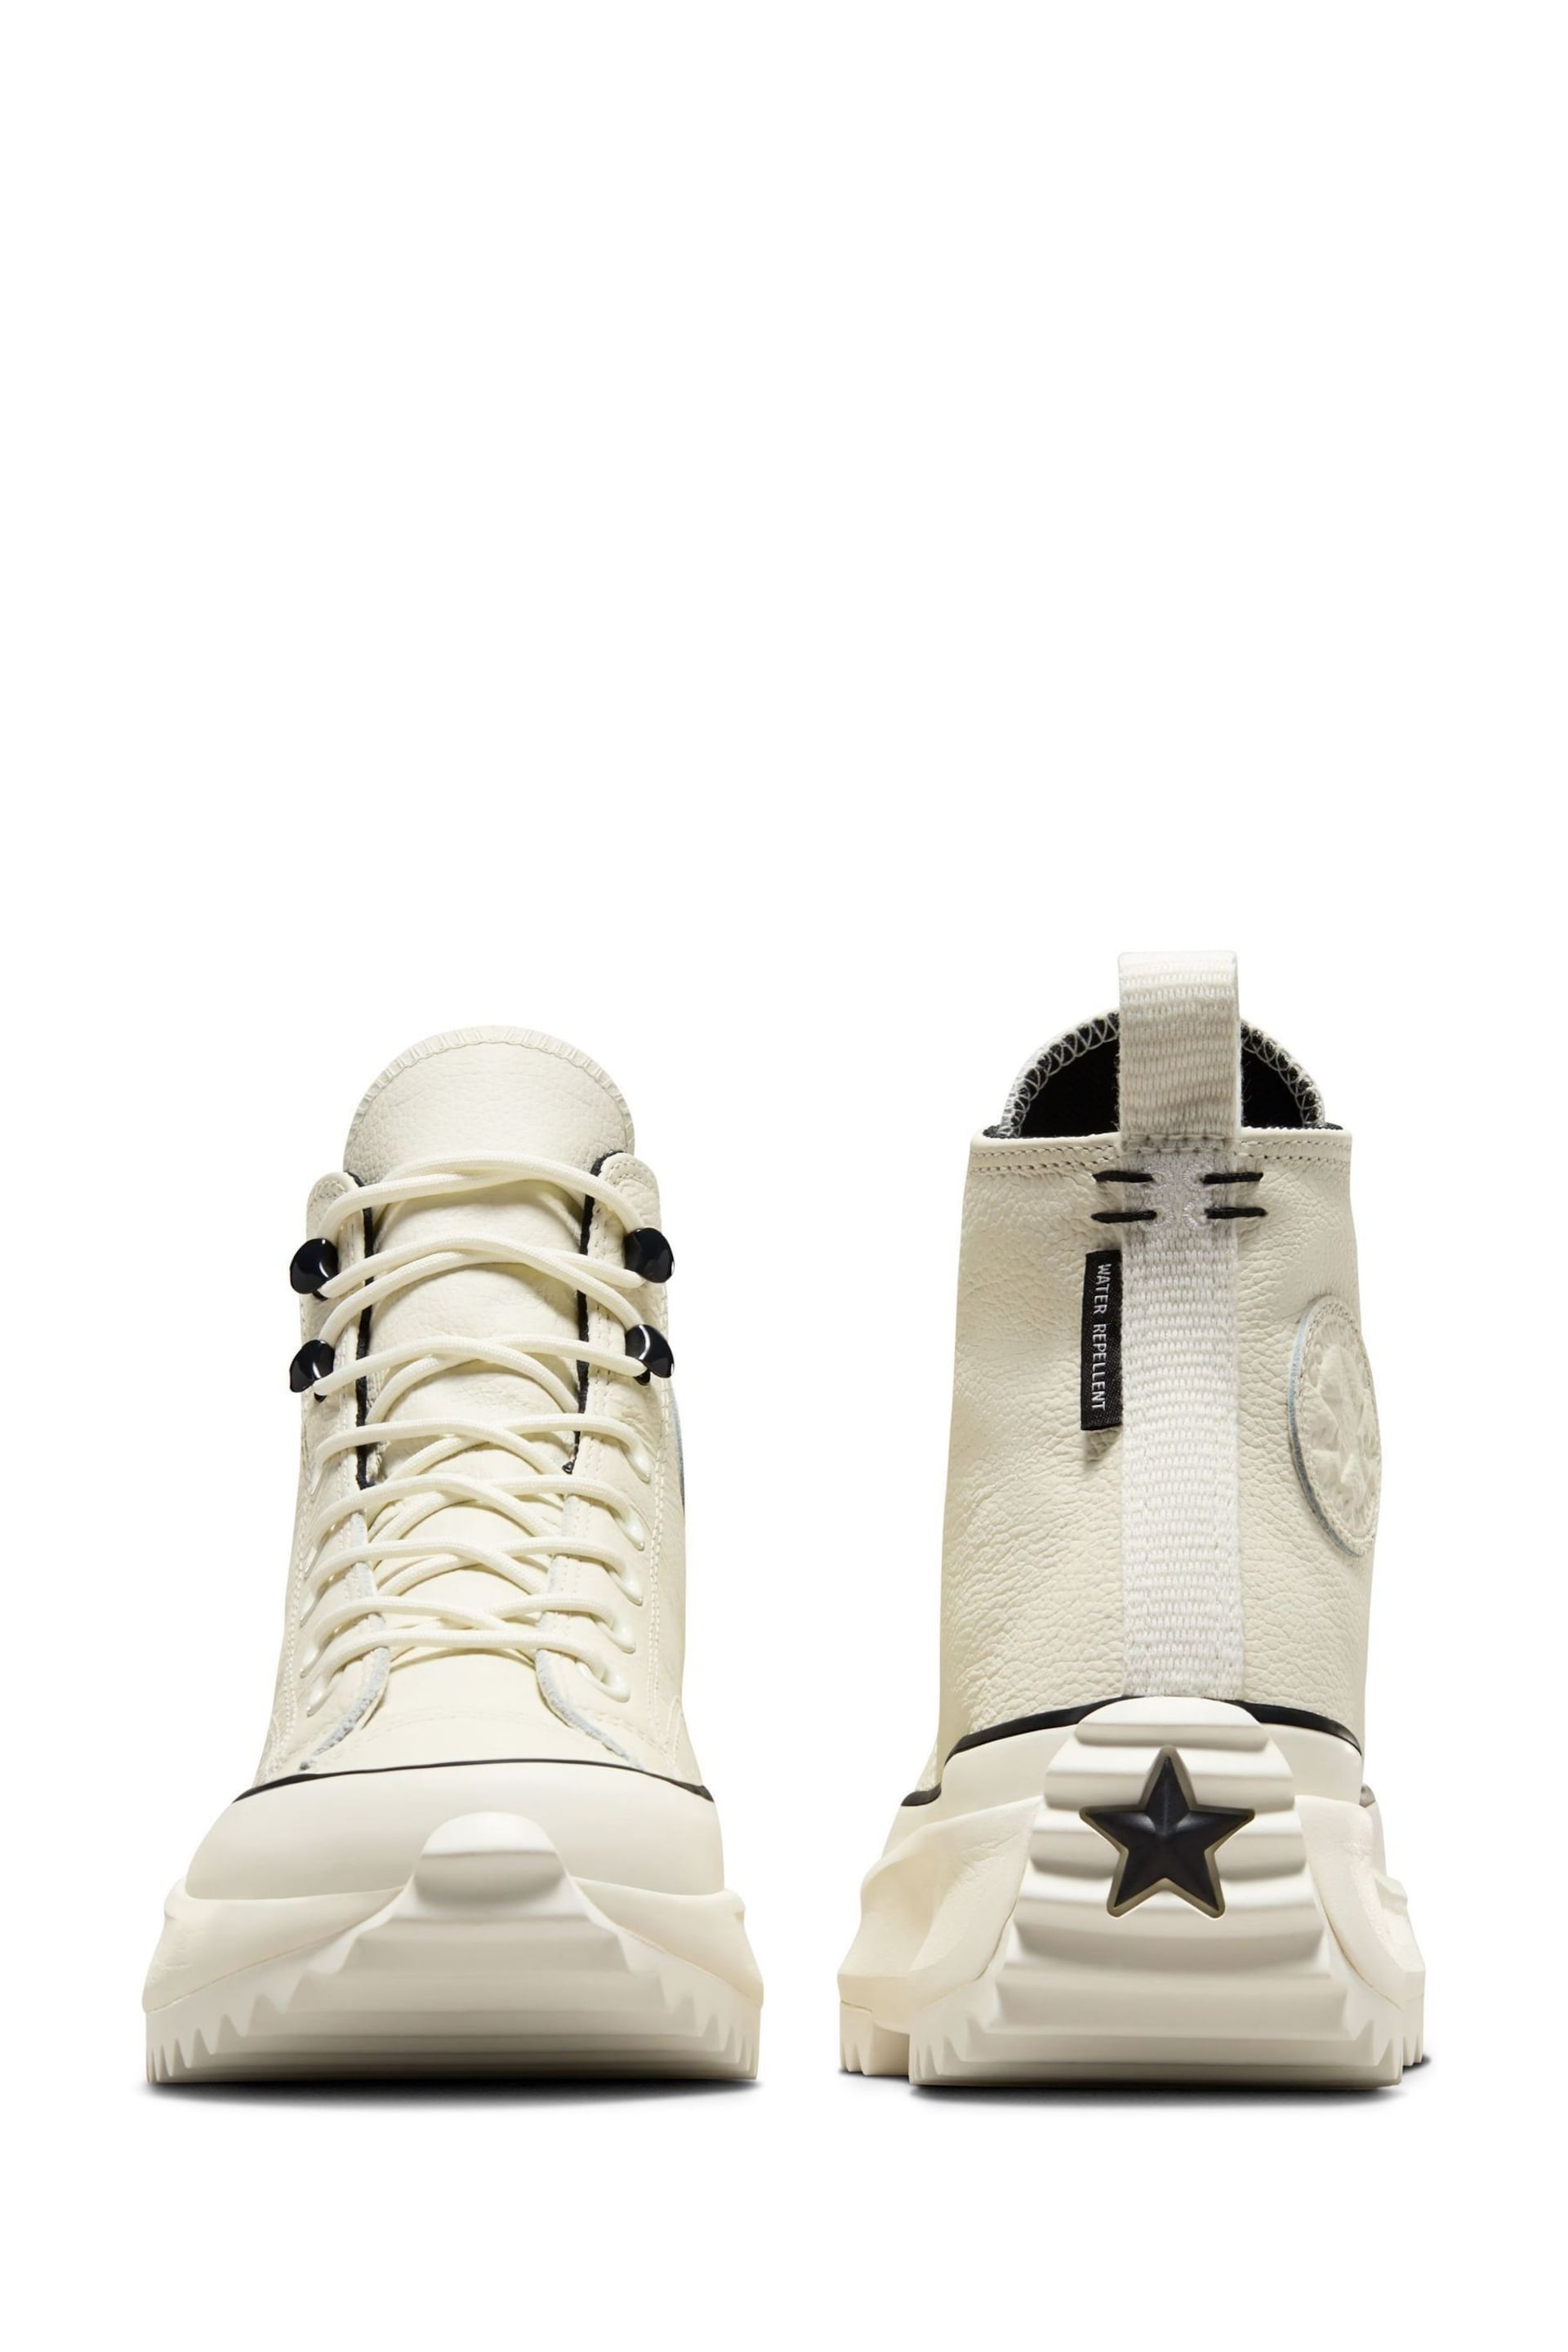 Converse Cream Leather Run Star Hike Trainers - Image 3 of 10